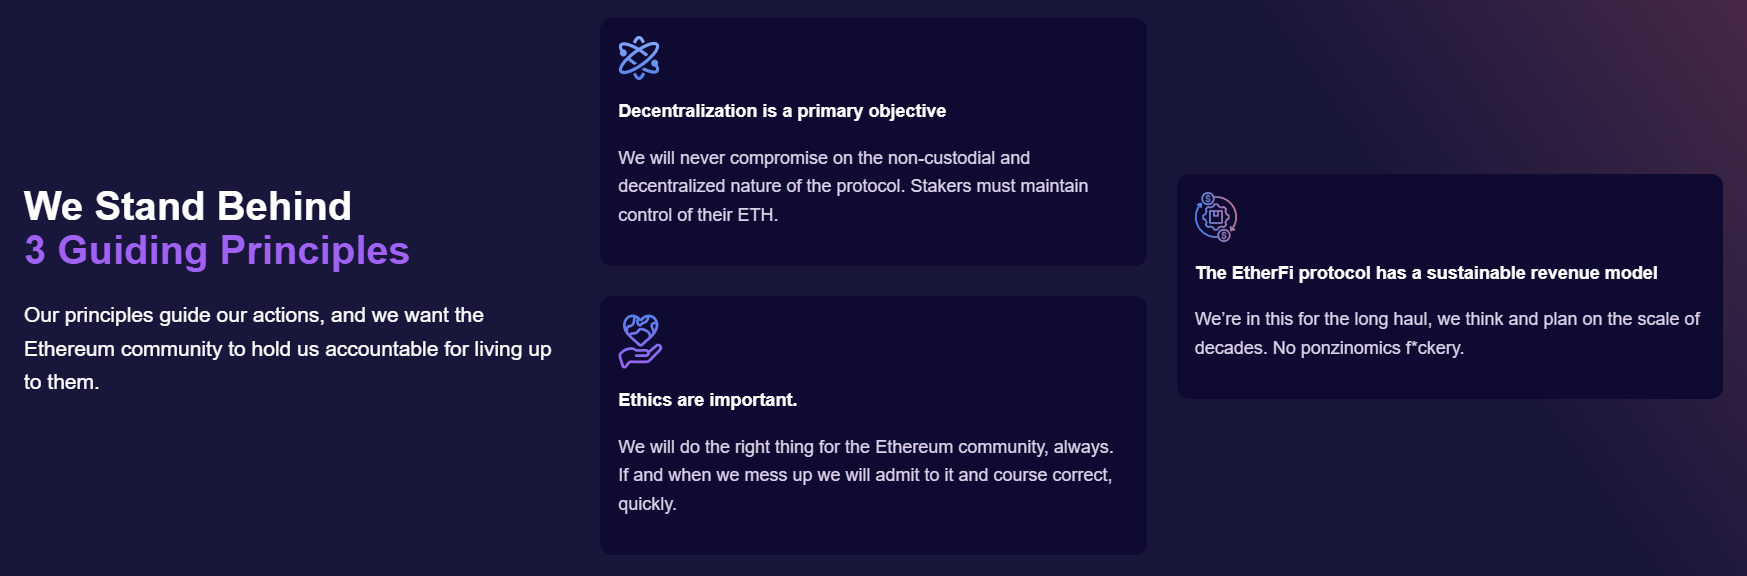 ether.fi About